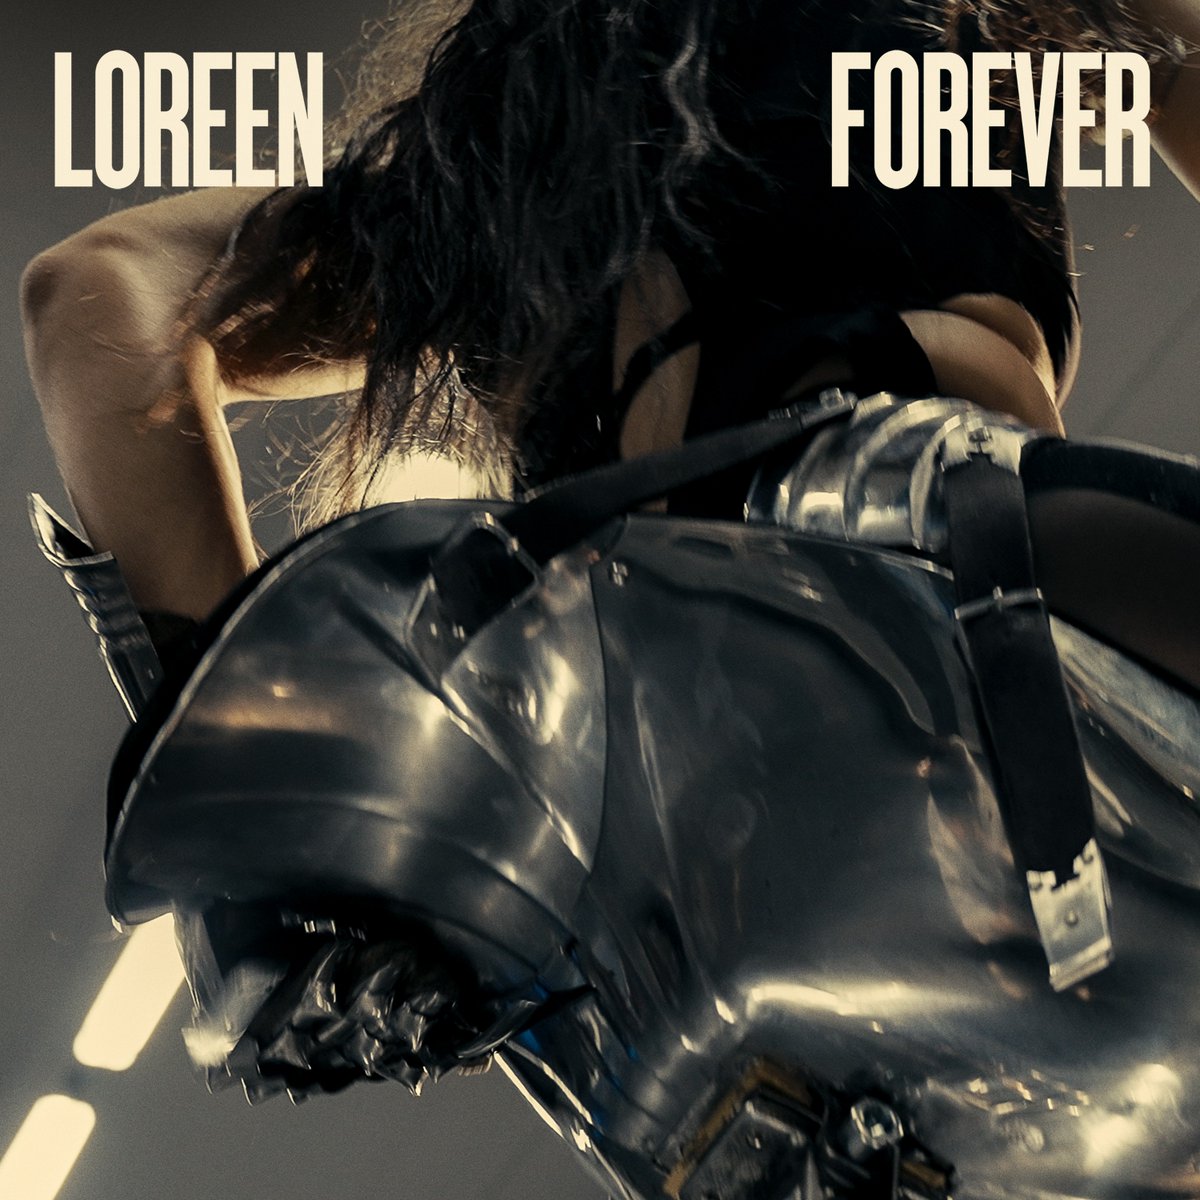 New Single: @LOREEN_TALHAOUI - 'Forever' Have you checked out the latest spiritual-pop single, “Forever” by Eurovision star #Loreen yet? 🤩 She's here on Tuesday 25 March. Stream now 👉 ingrv.es/forever-52z-g #Forever